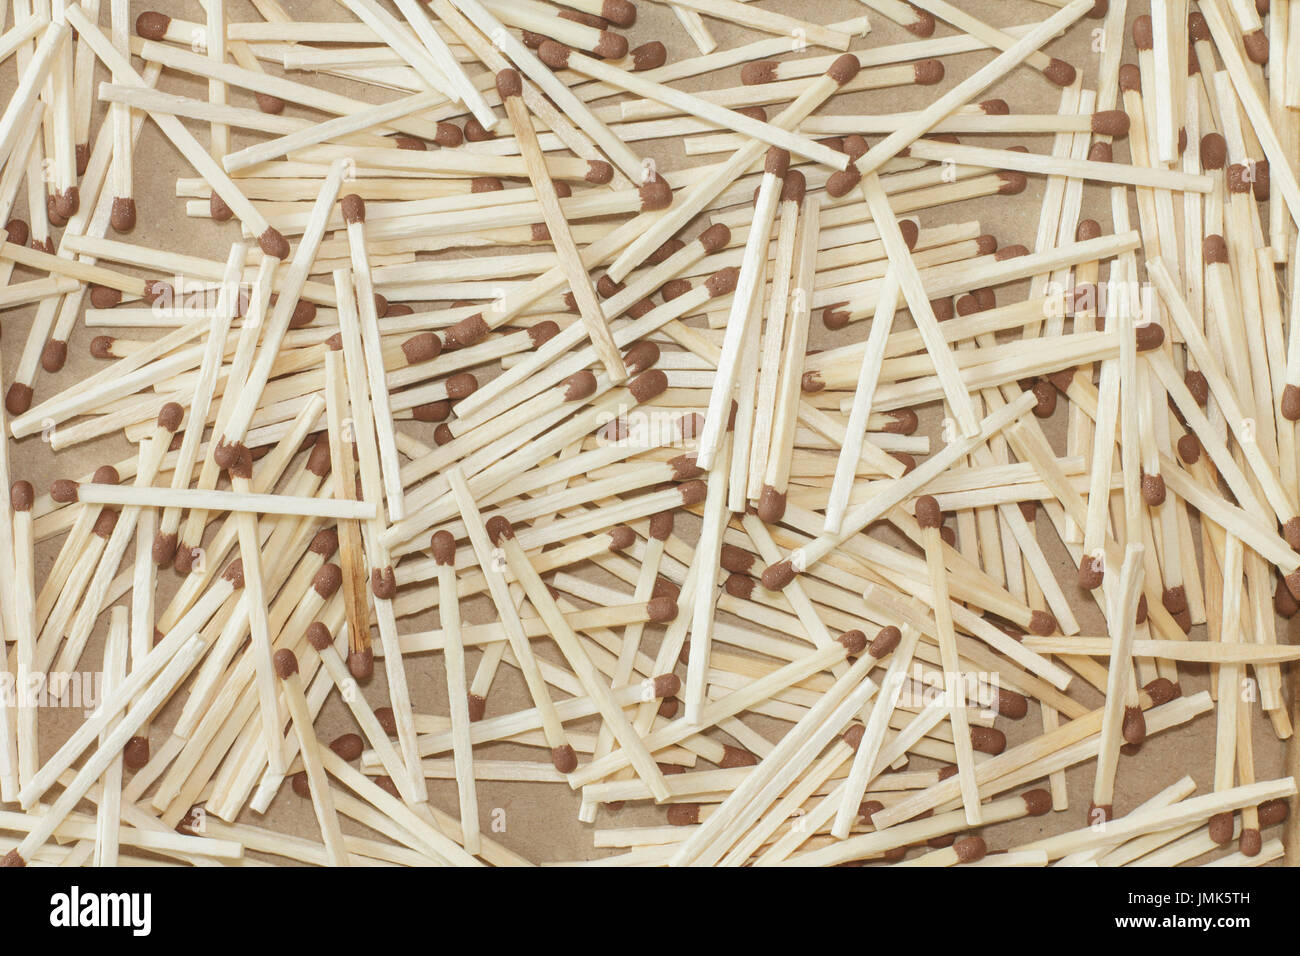 Wooden matches with brown heads Stock Photo